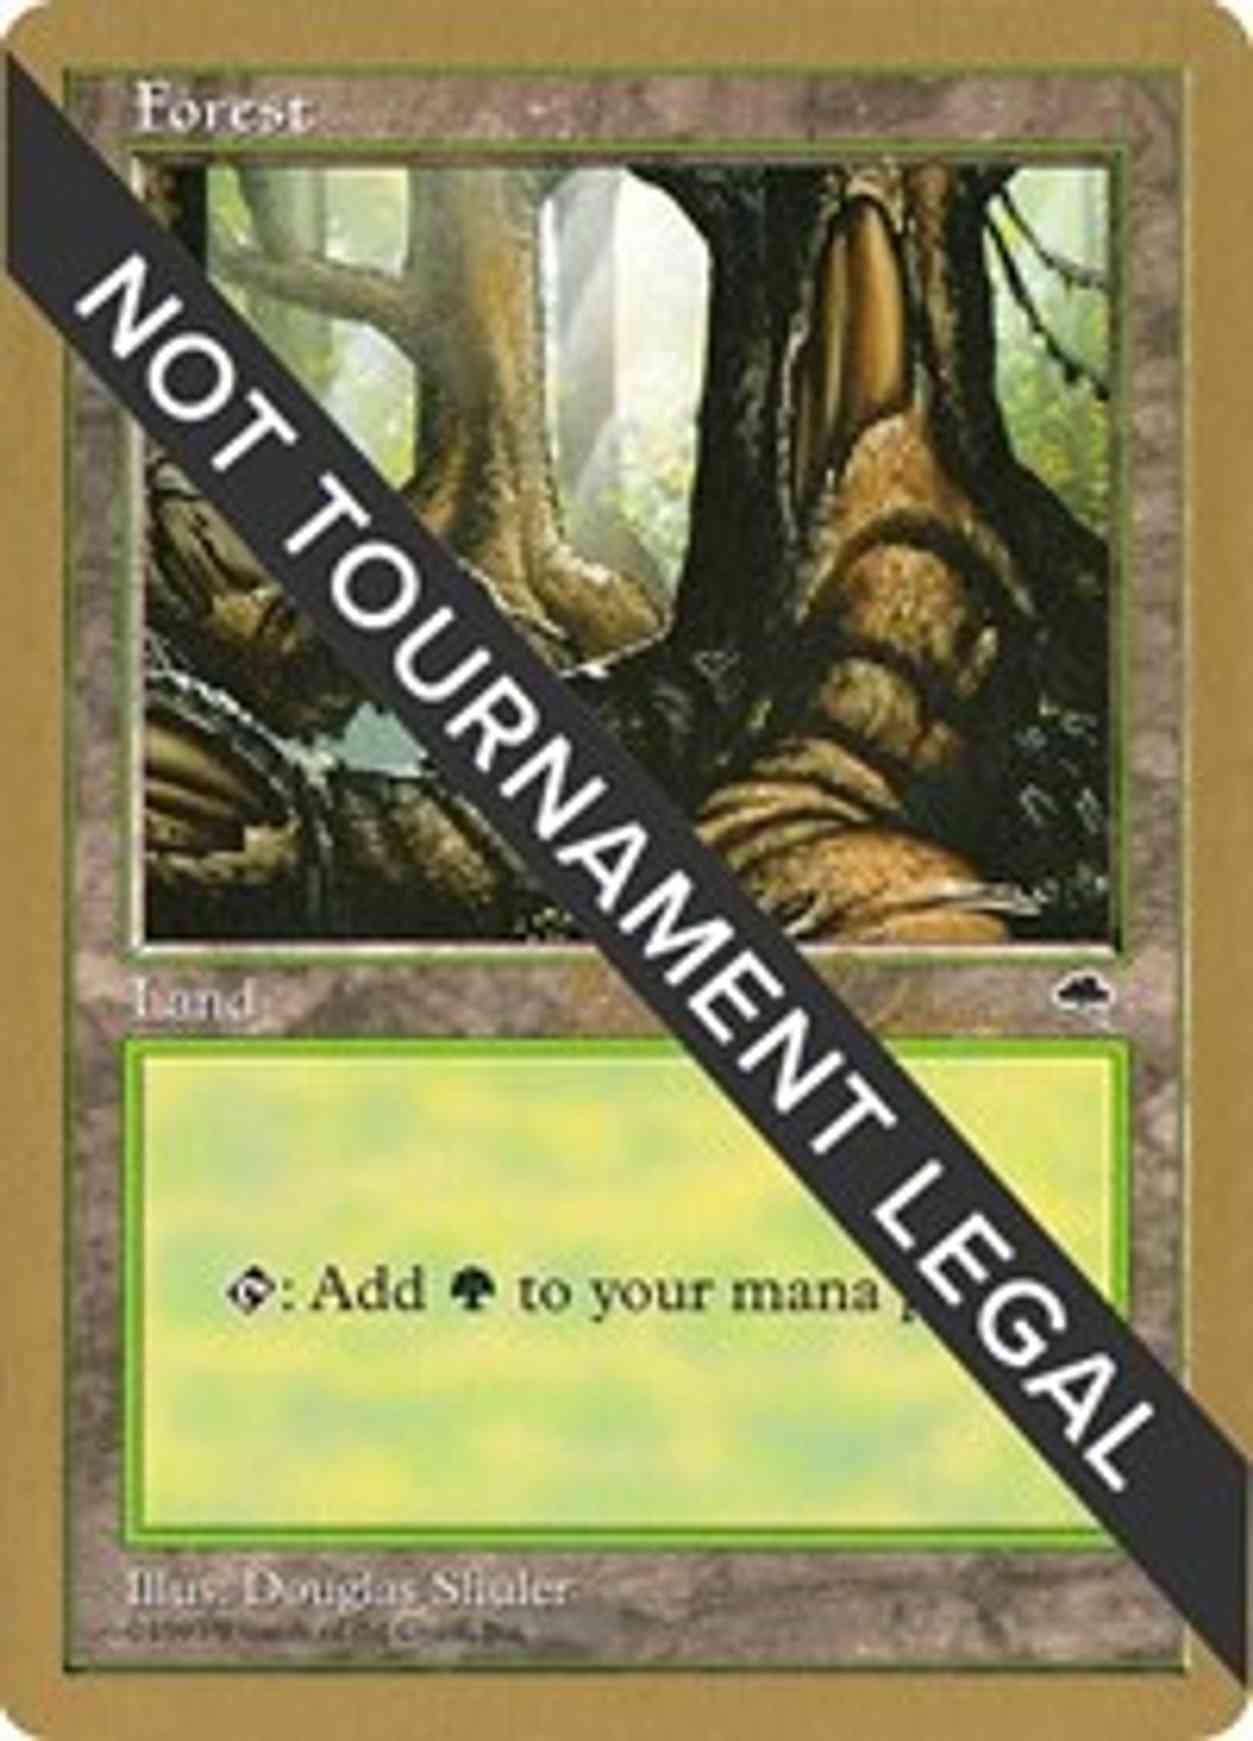 Forest (Pond) - 1998 Brian Selden (TMP) magic card front